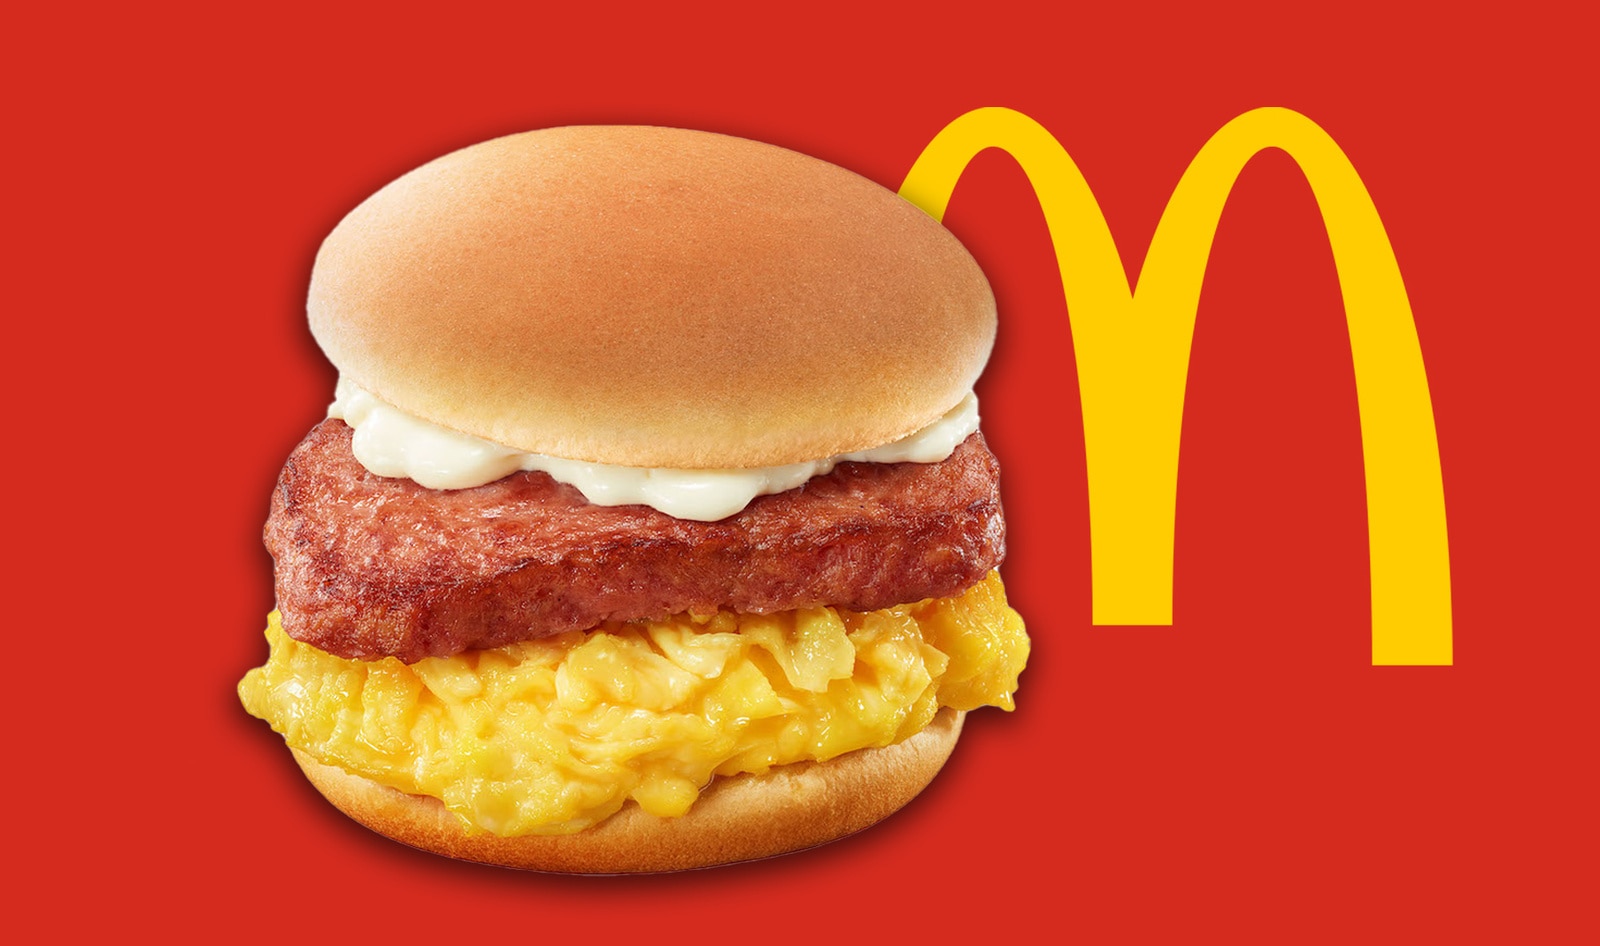 McDonald’s Adds First Vegan Meat Option in China